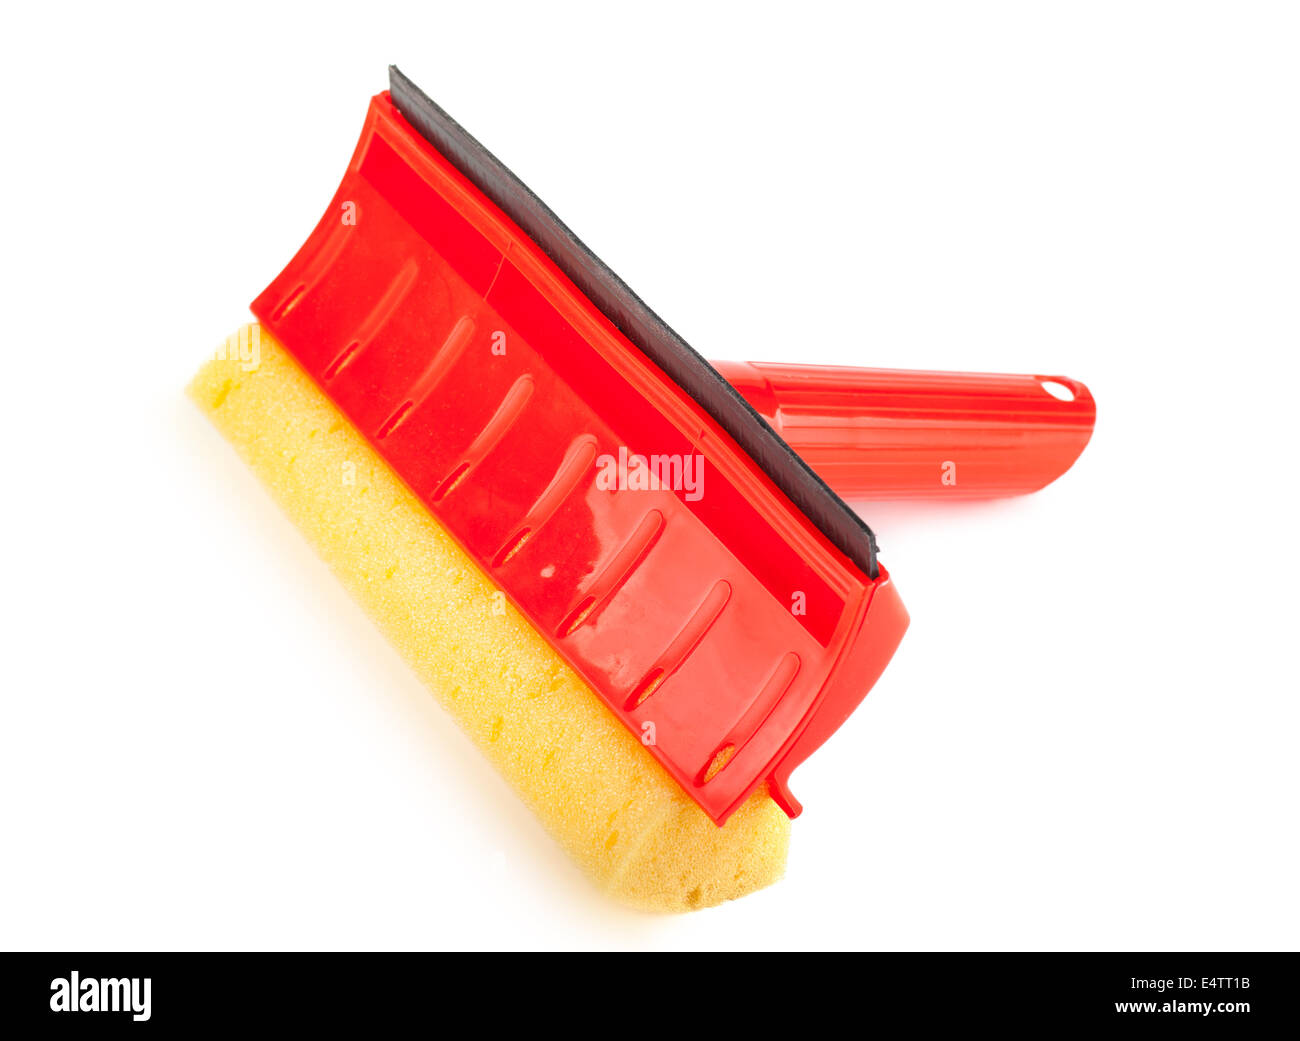 Red rubber window cleaner Stock Photo